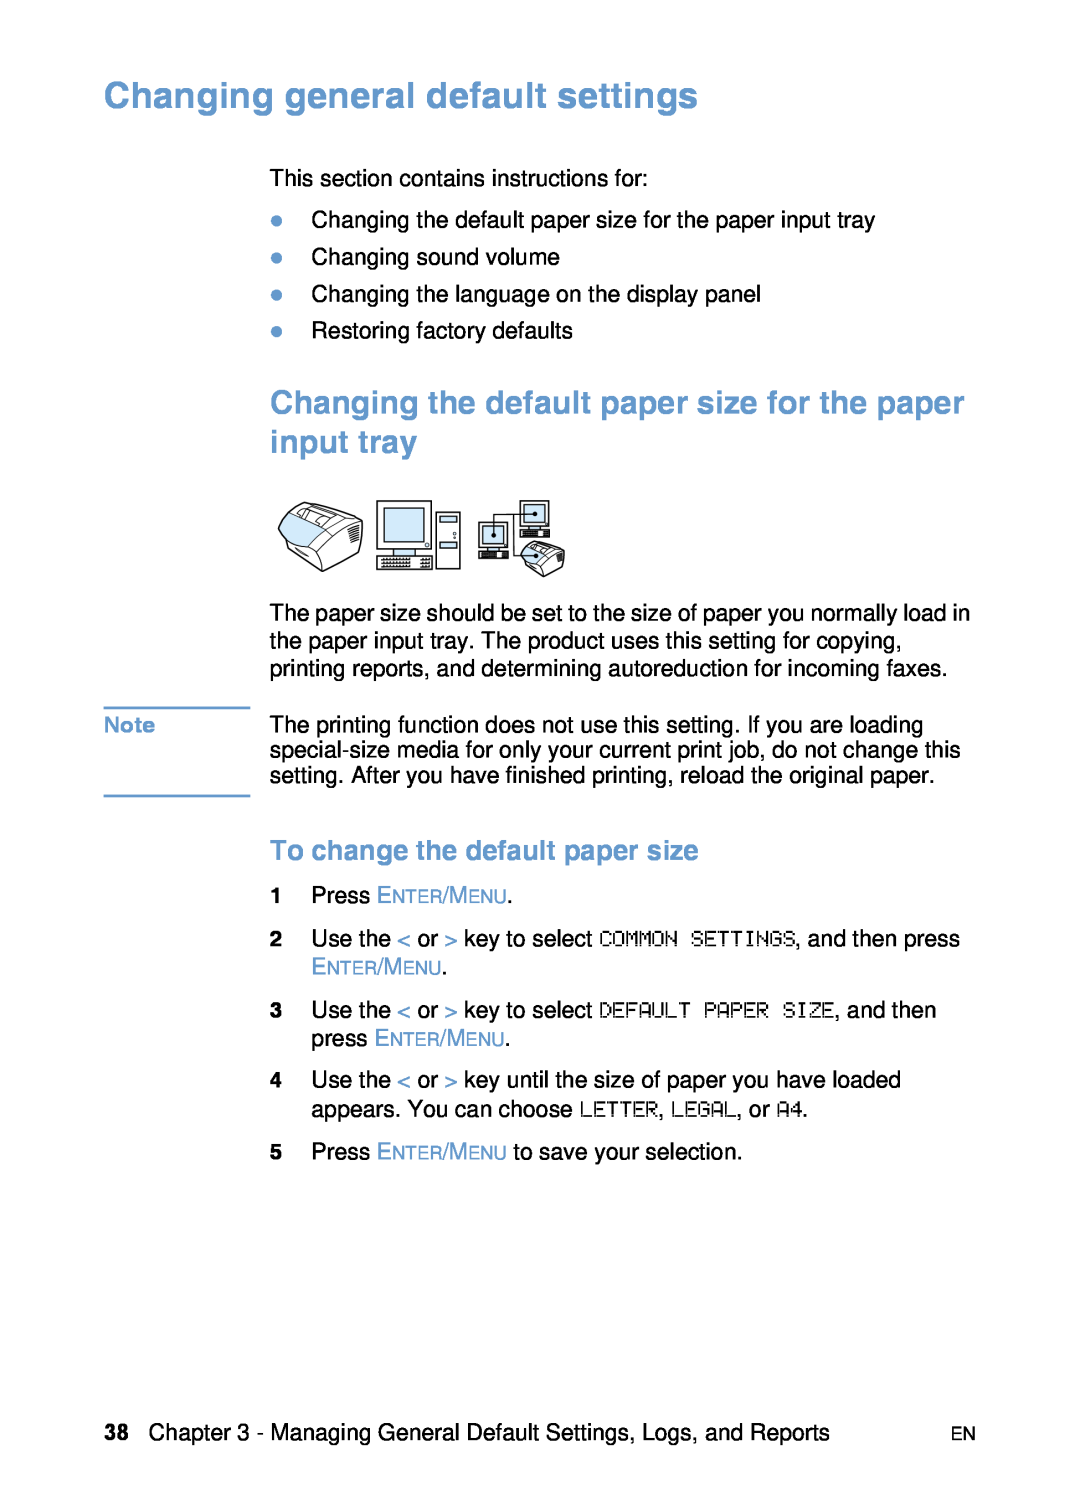 HP 3200 manual Changing general default settings, Changing the default paper size for the paper input tray 